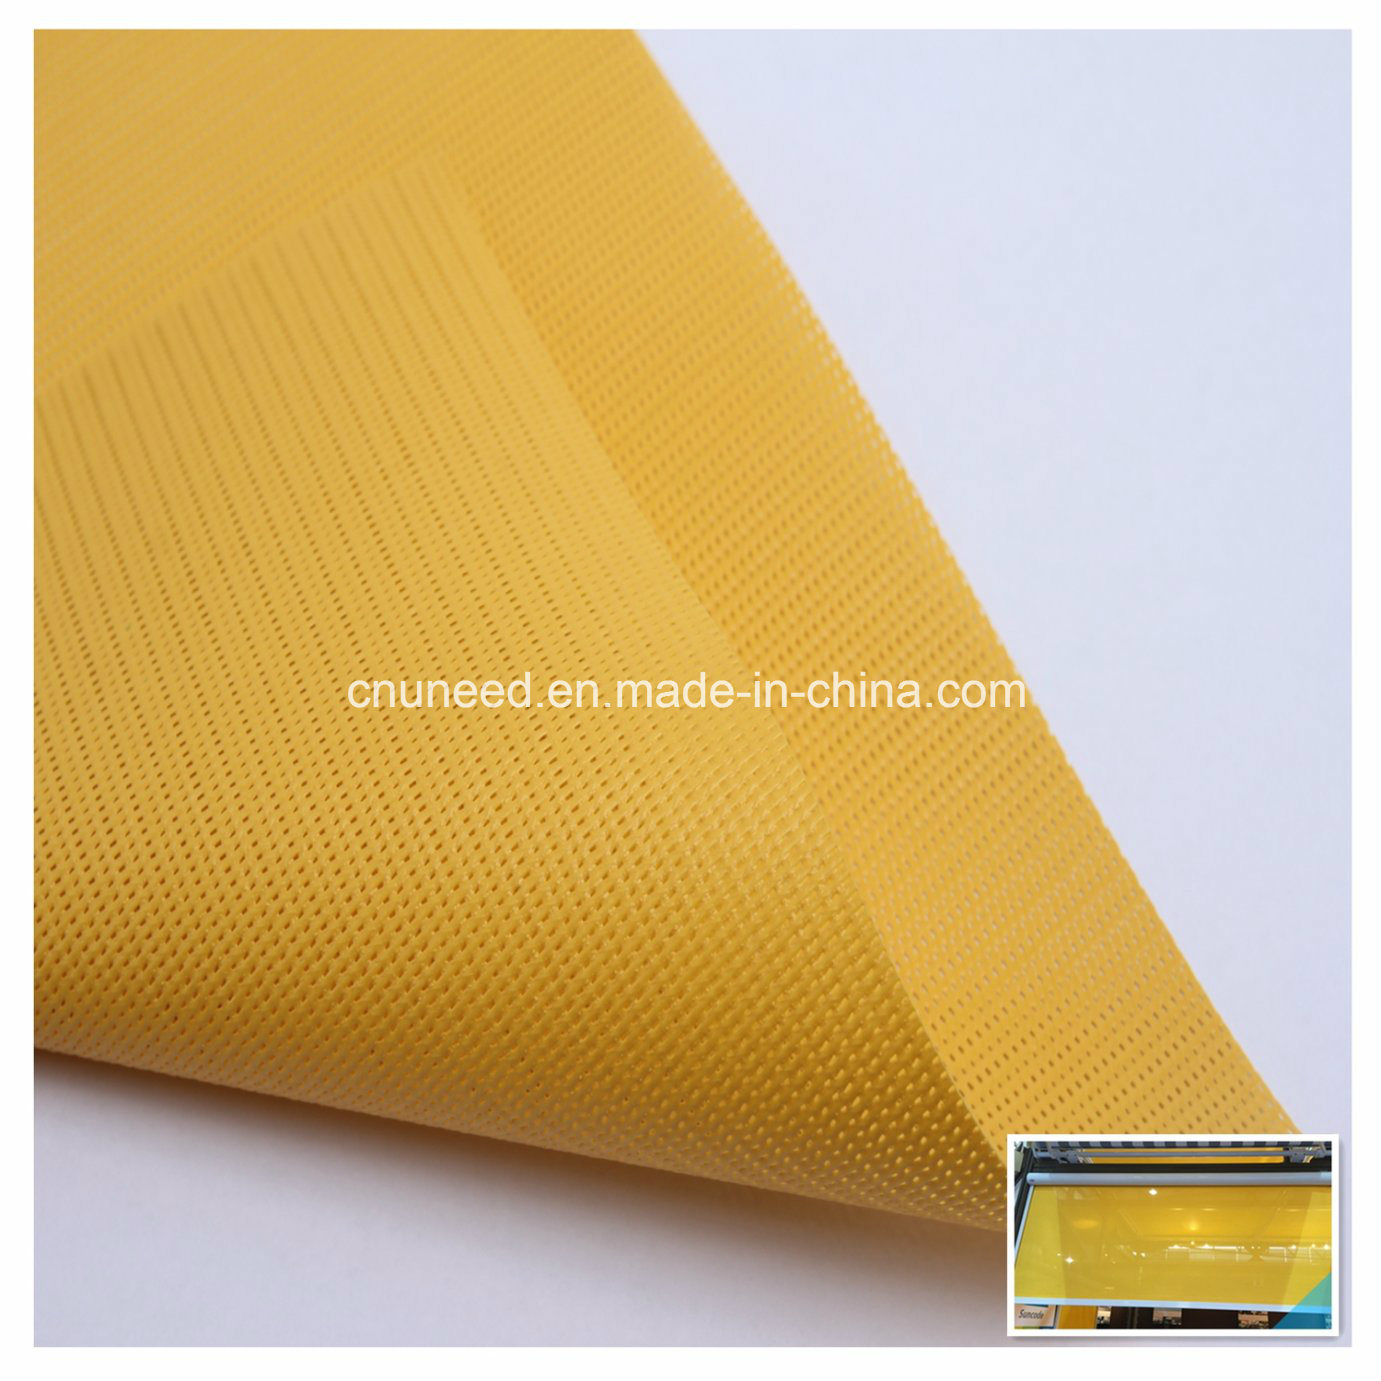 PVC-Coated Polyester Mesh Fabric to Sunshading/Controlling, Construction, Sign & Awning